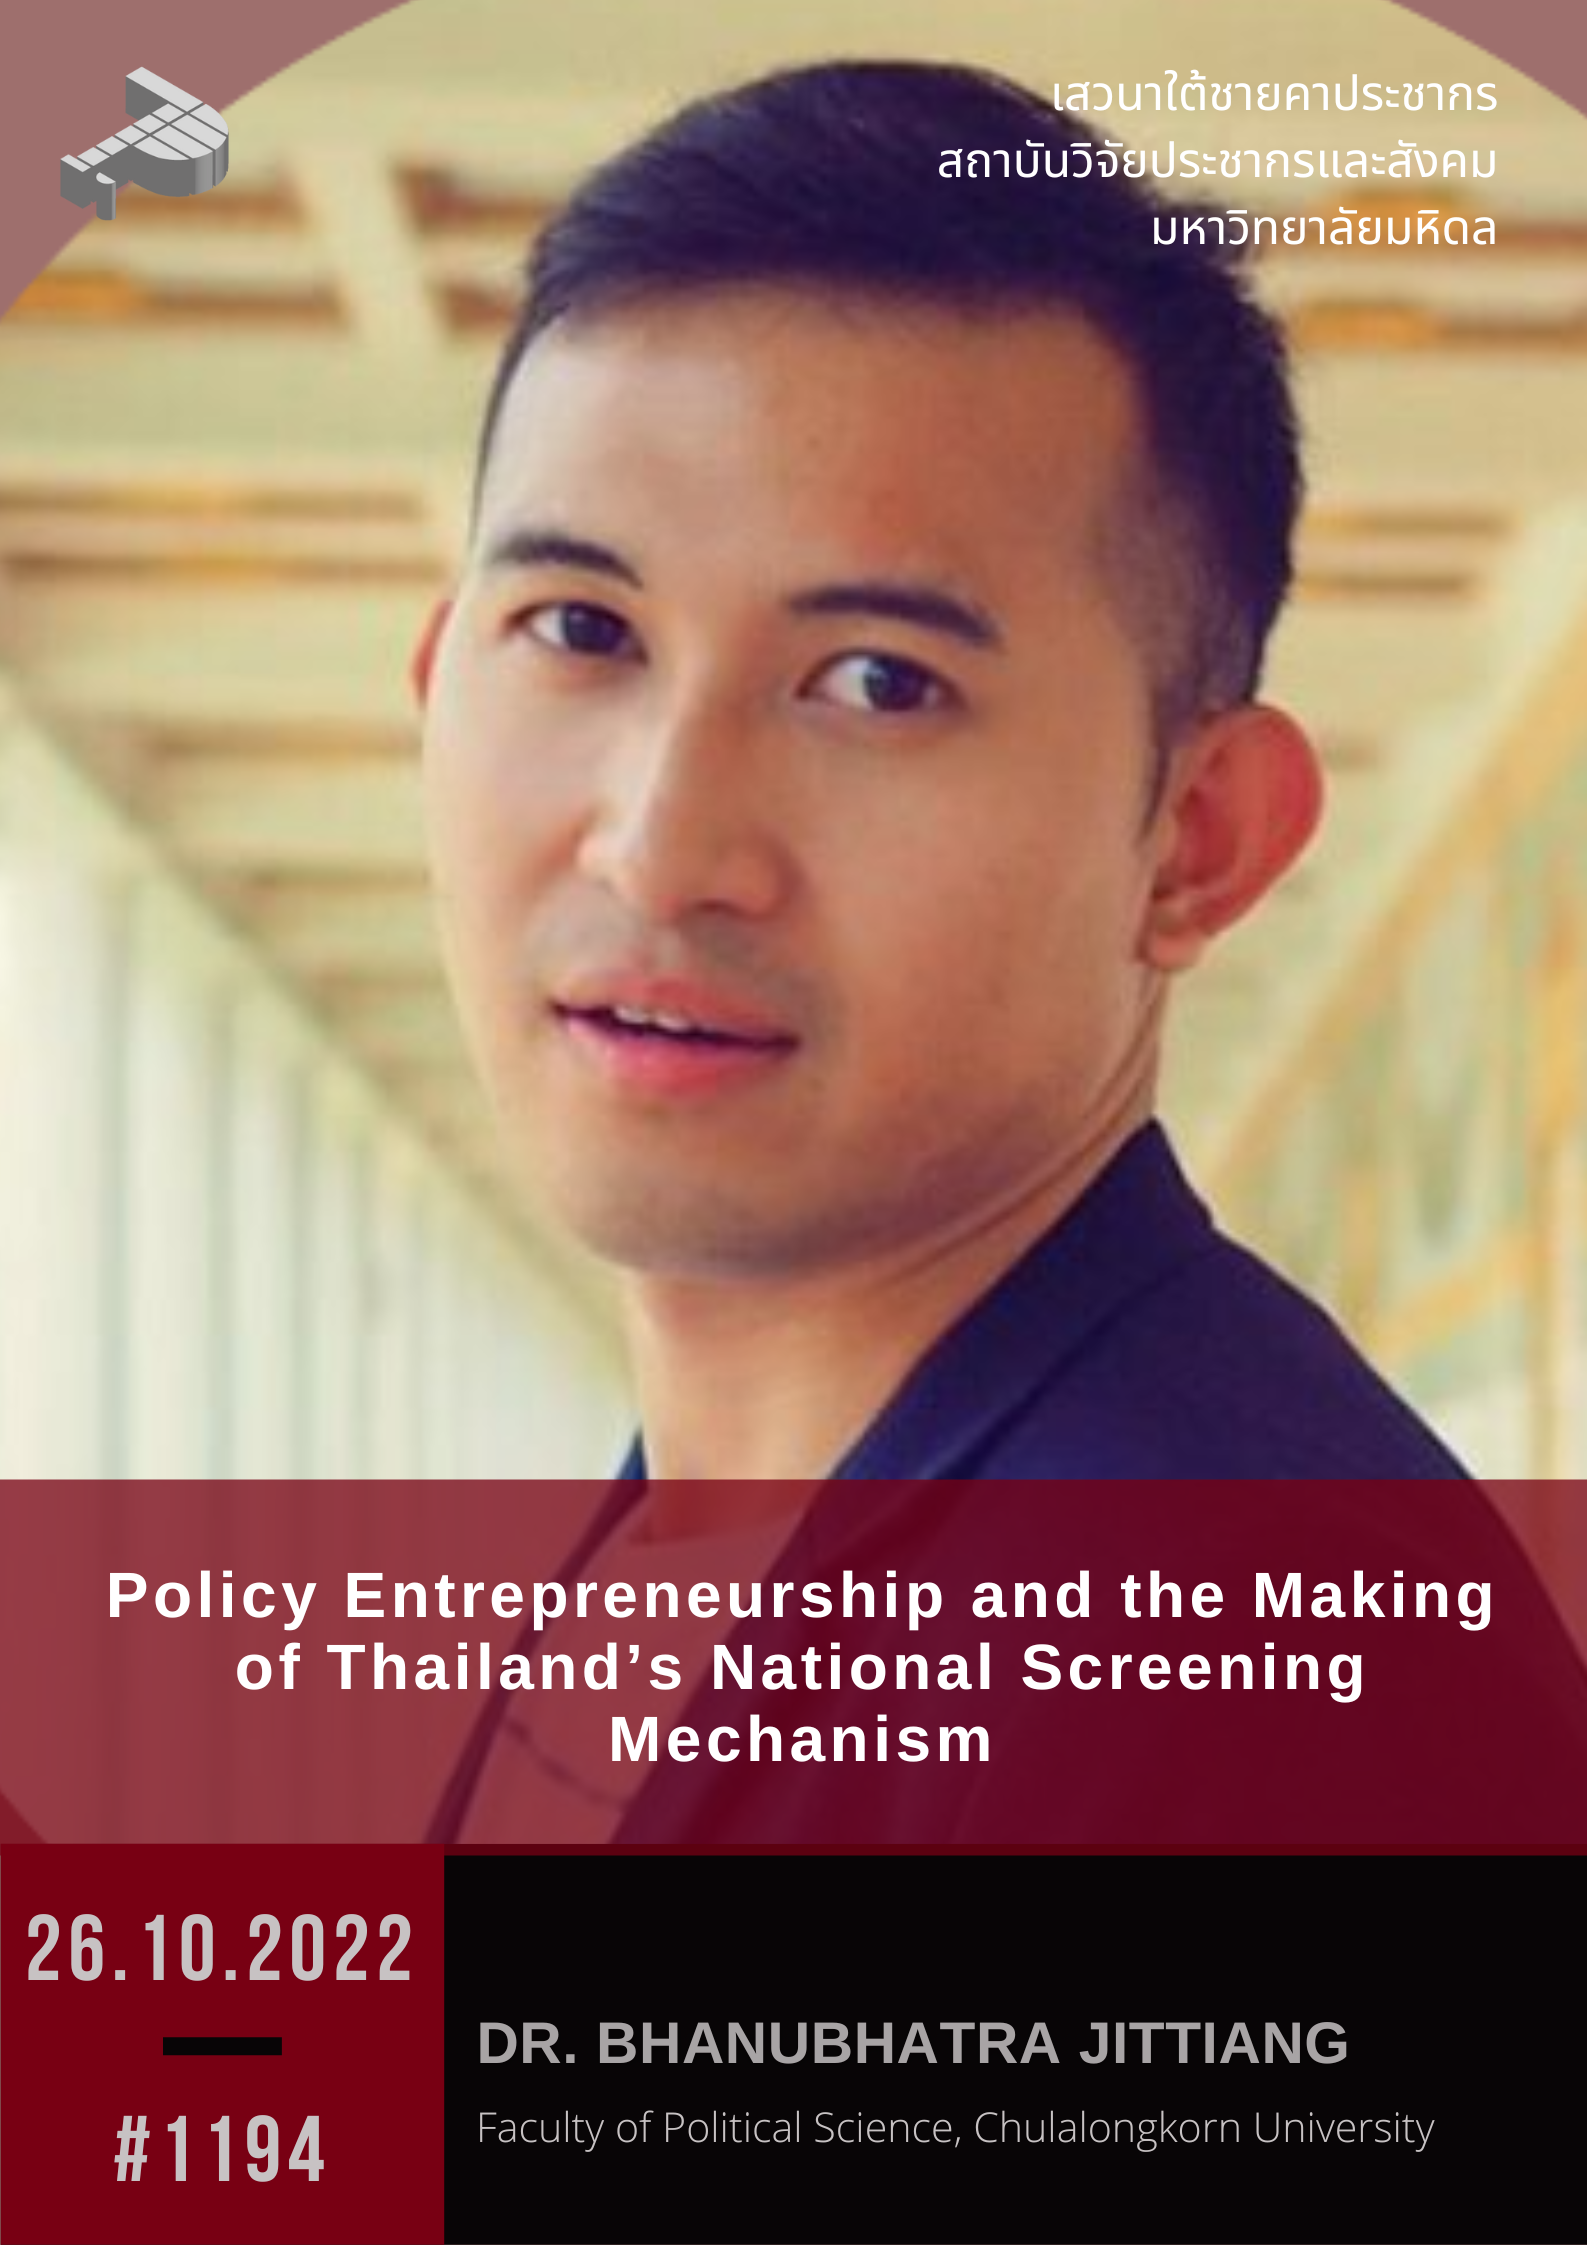 Policy Entrepreneurship and the Making of Thailand’s National Screening Mechanism